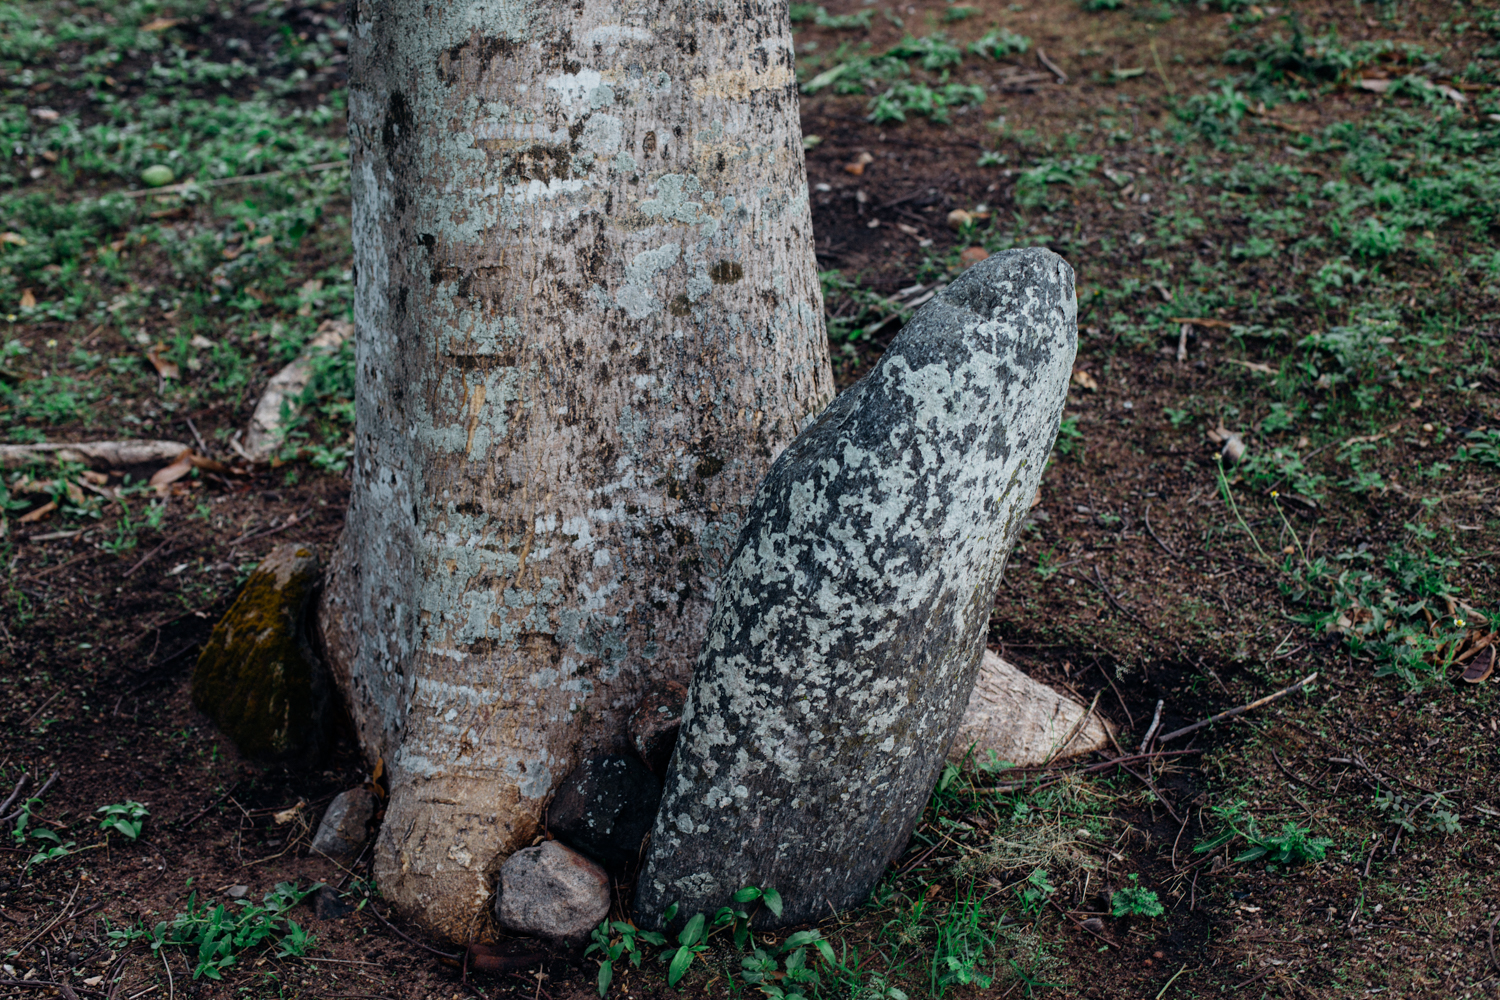 Ikom Stone Monolith being pushed by the stem of a tree